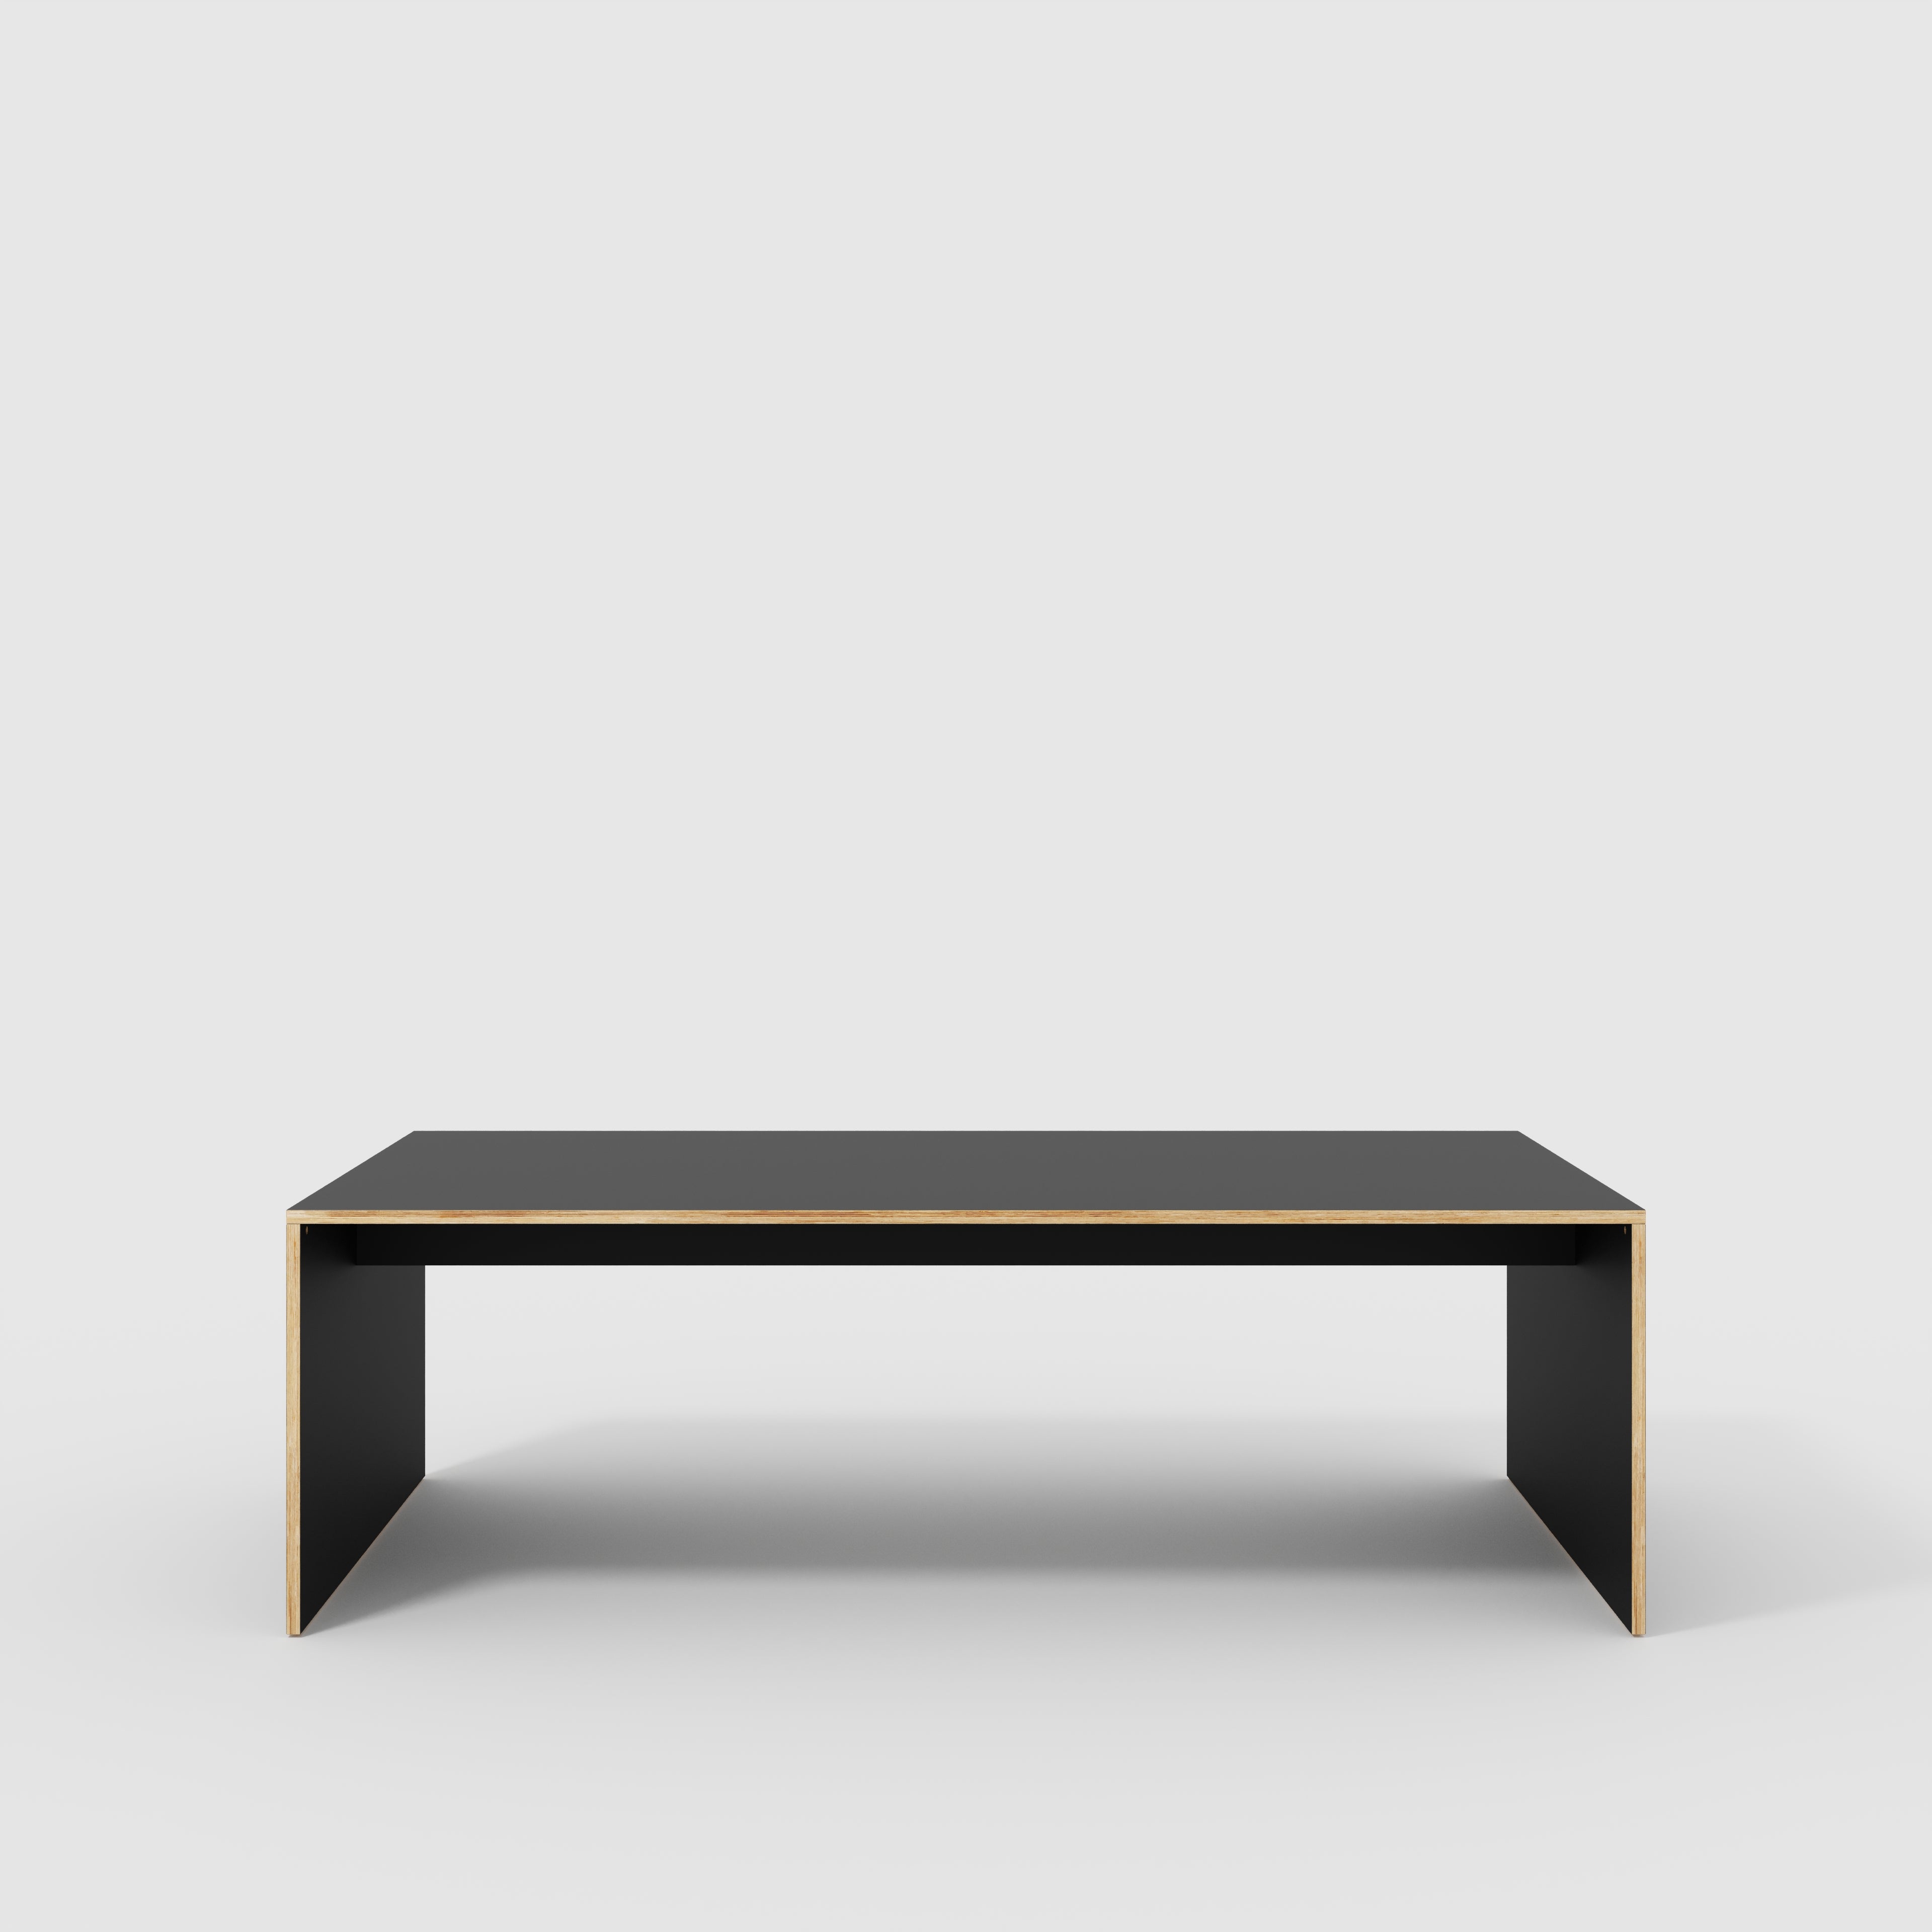 Table with Solid Sides - Formica Diamond Black - 2400(w) x 1200(d) x 735(h)